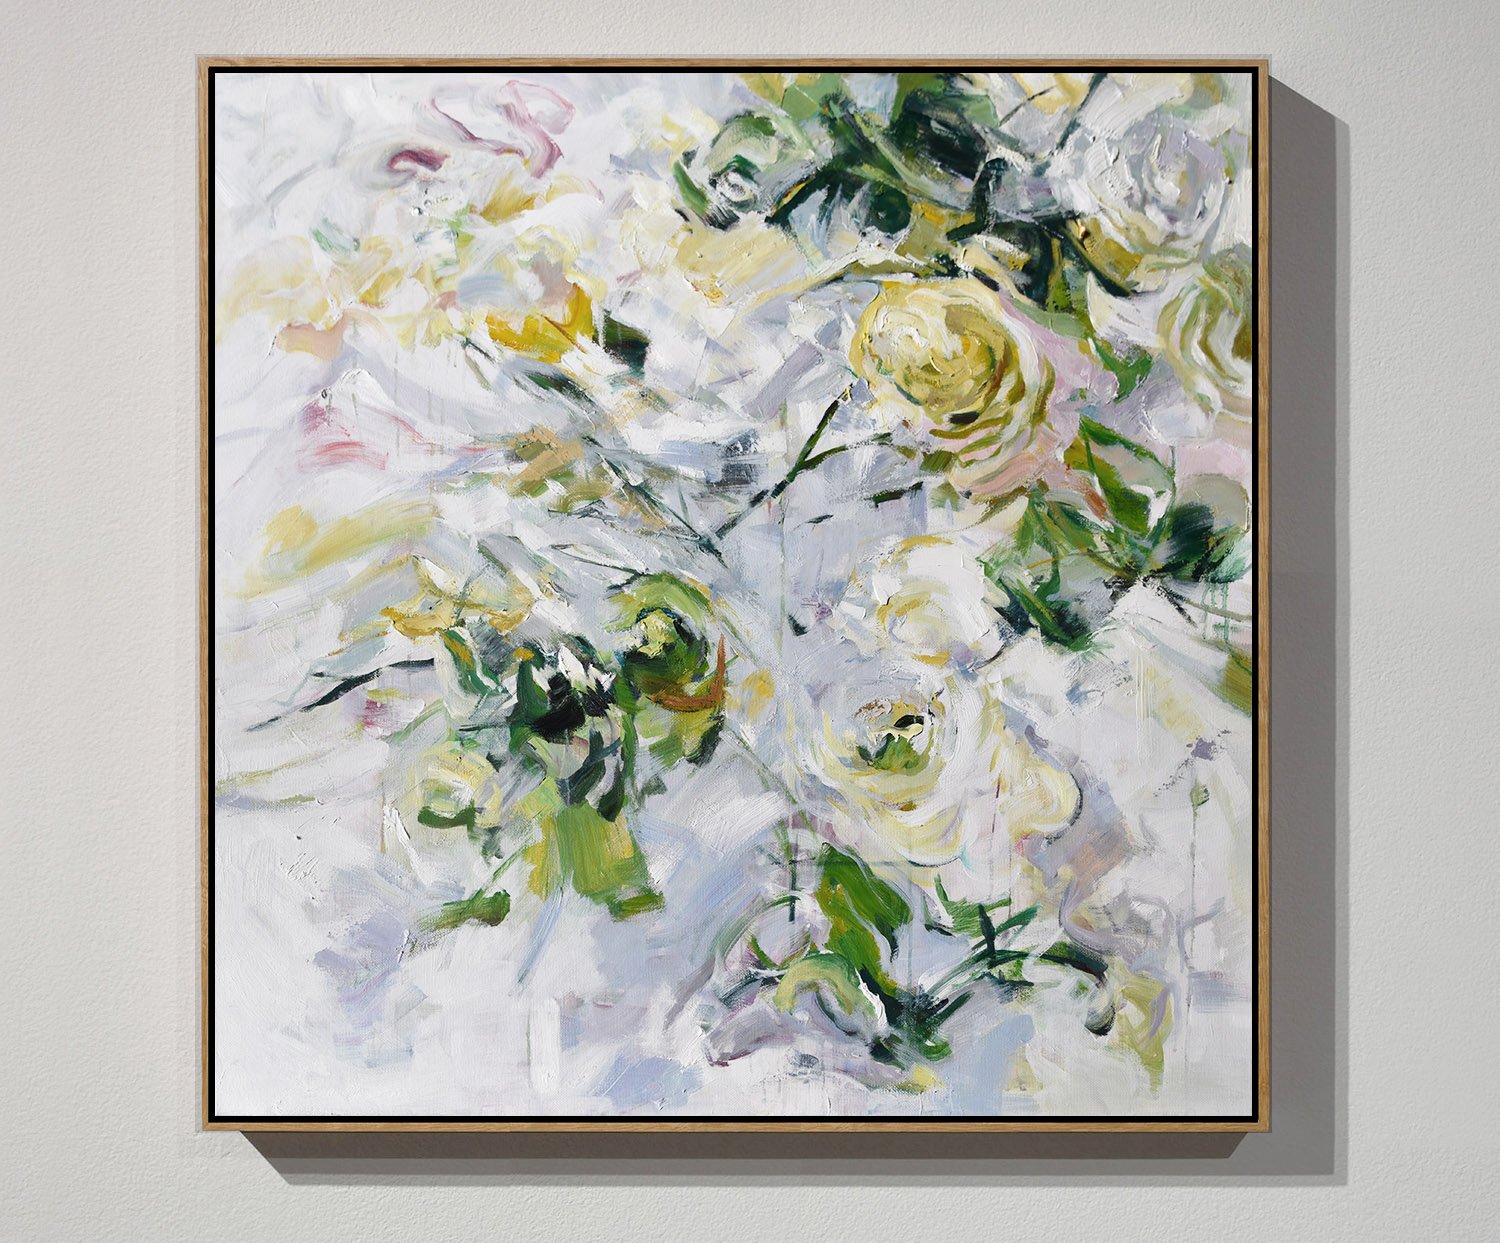 Hand-Painted Oversized Abstract Flower Oil Painting, Original Art, Painting On Canvas - Cheap Wall Art Bedroom Oversize